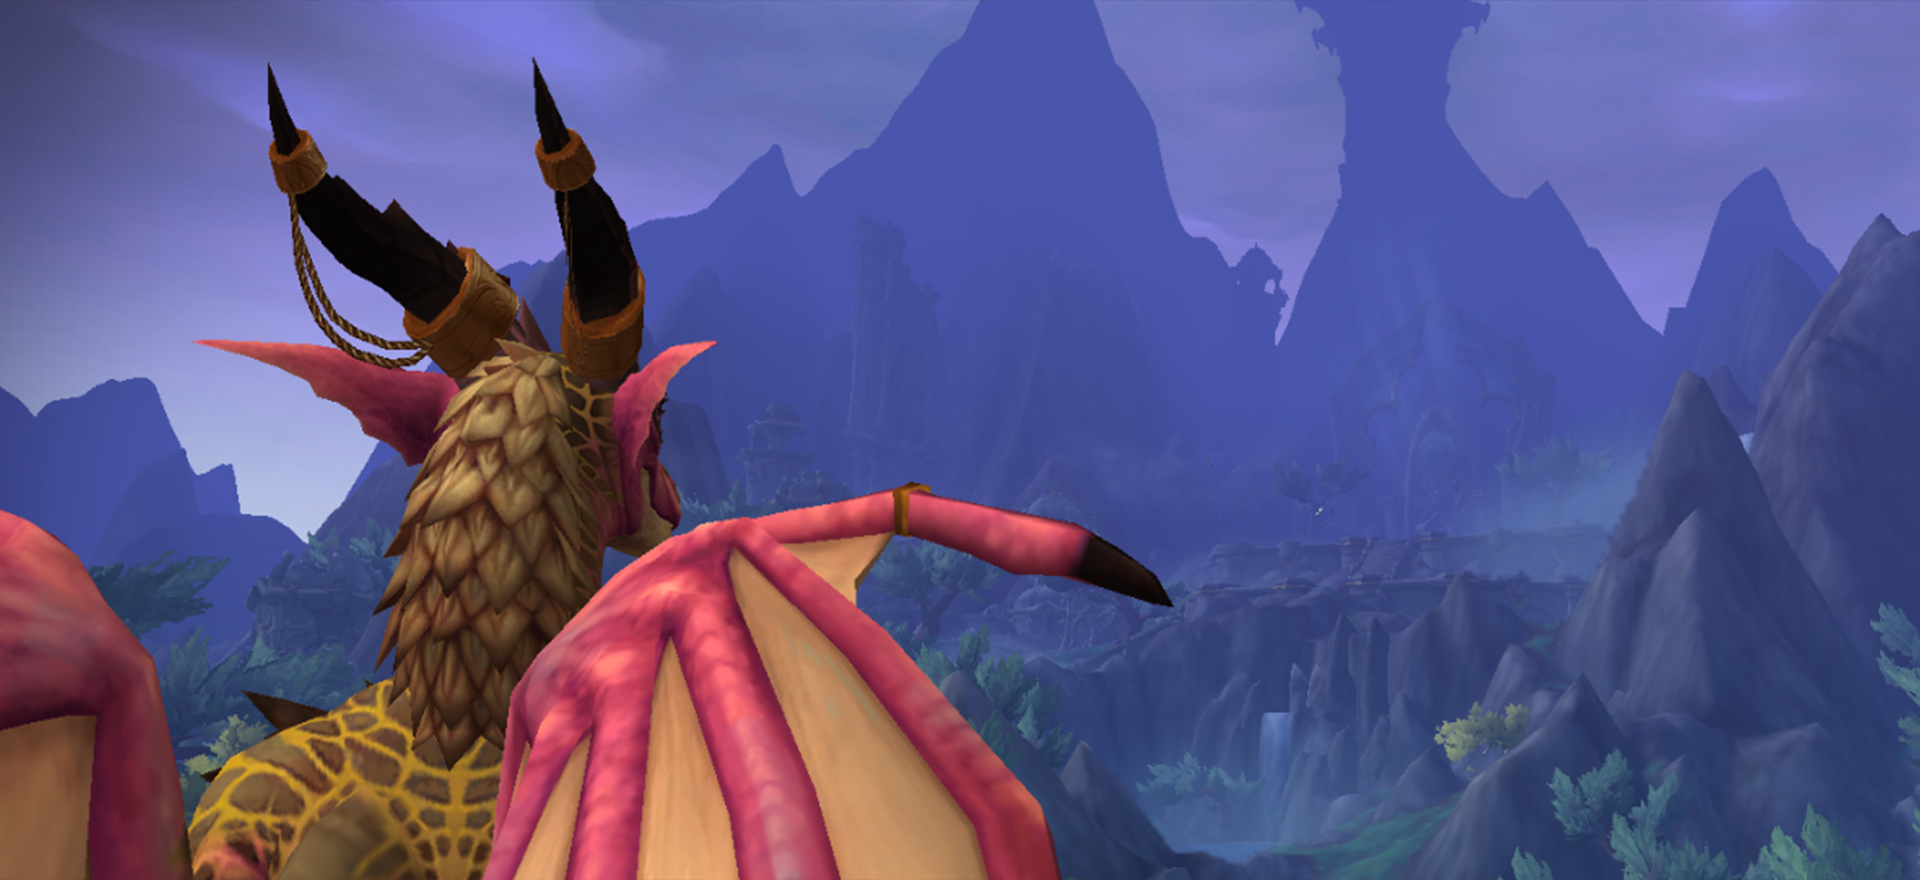 Soaring Token Prices - Wowhead Economy Weekly Wrap-Up 285